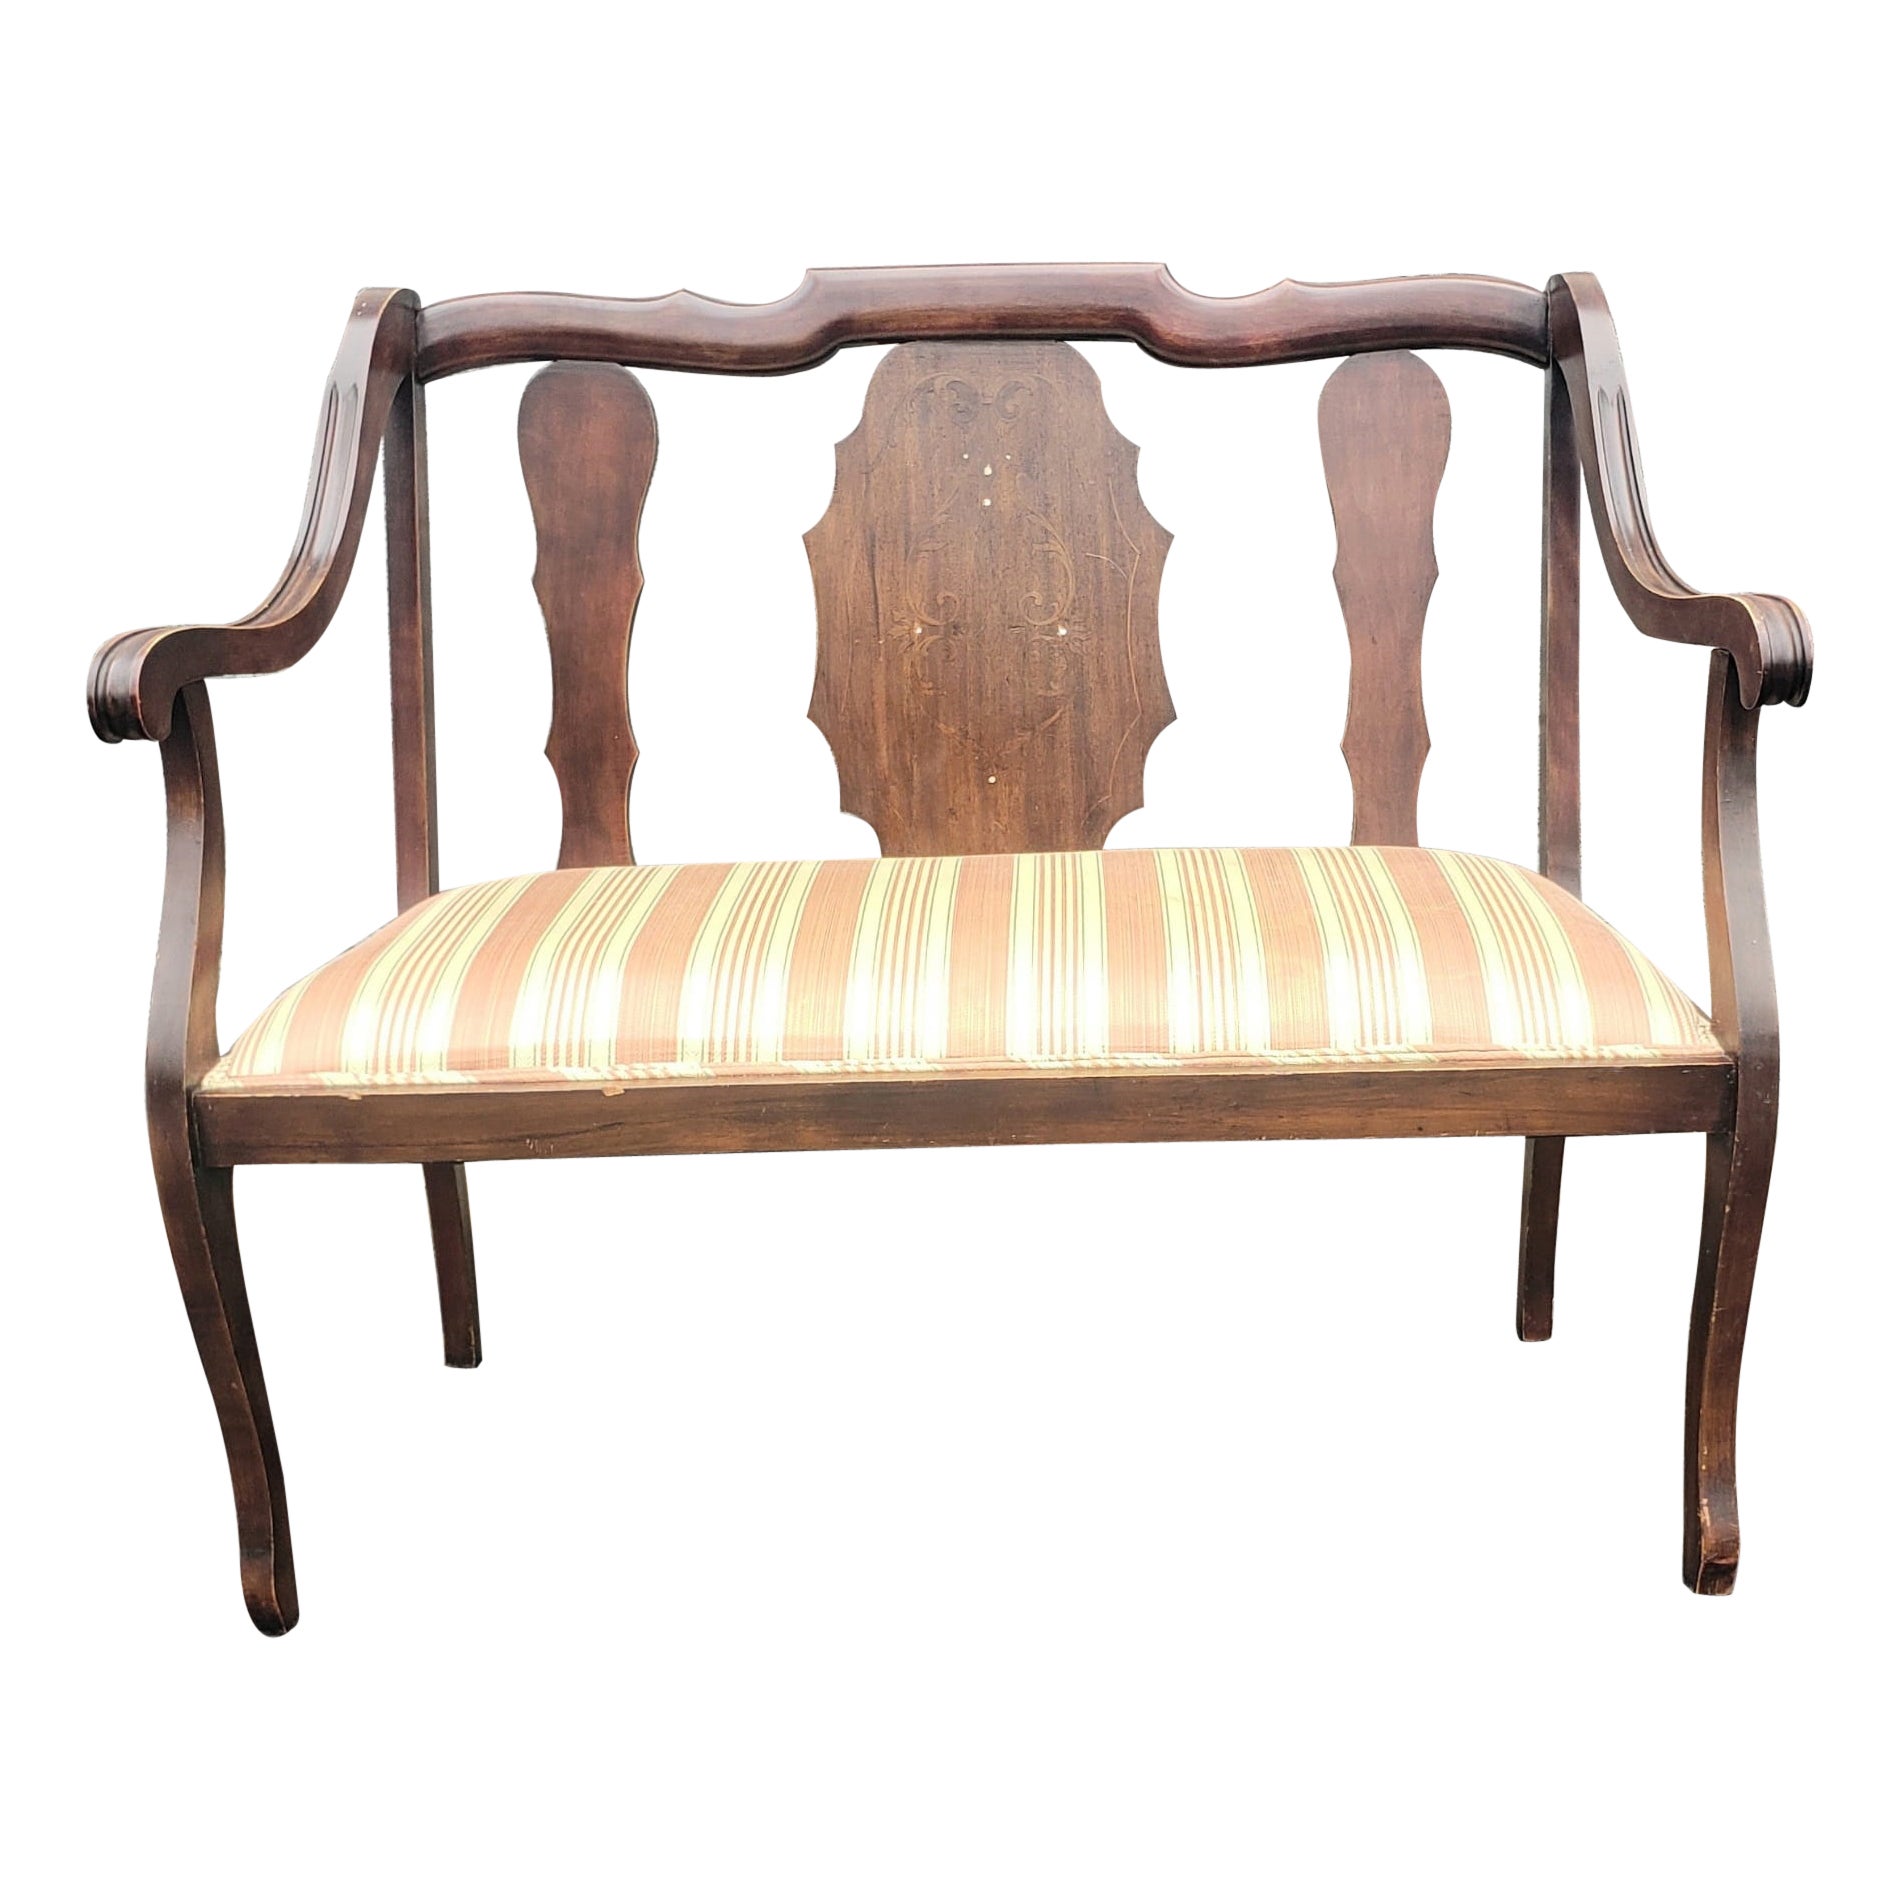 20th Century George III Style Walnut with Inlay and Upholstered Seat Settee For Sale